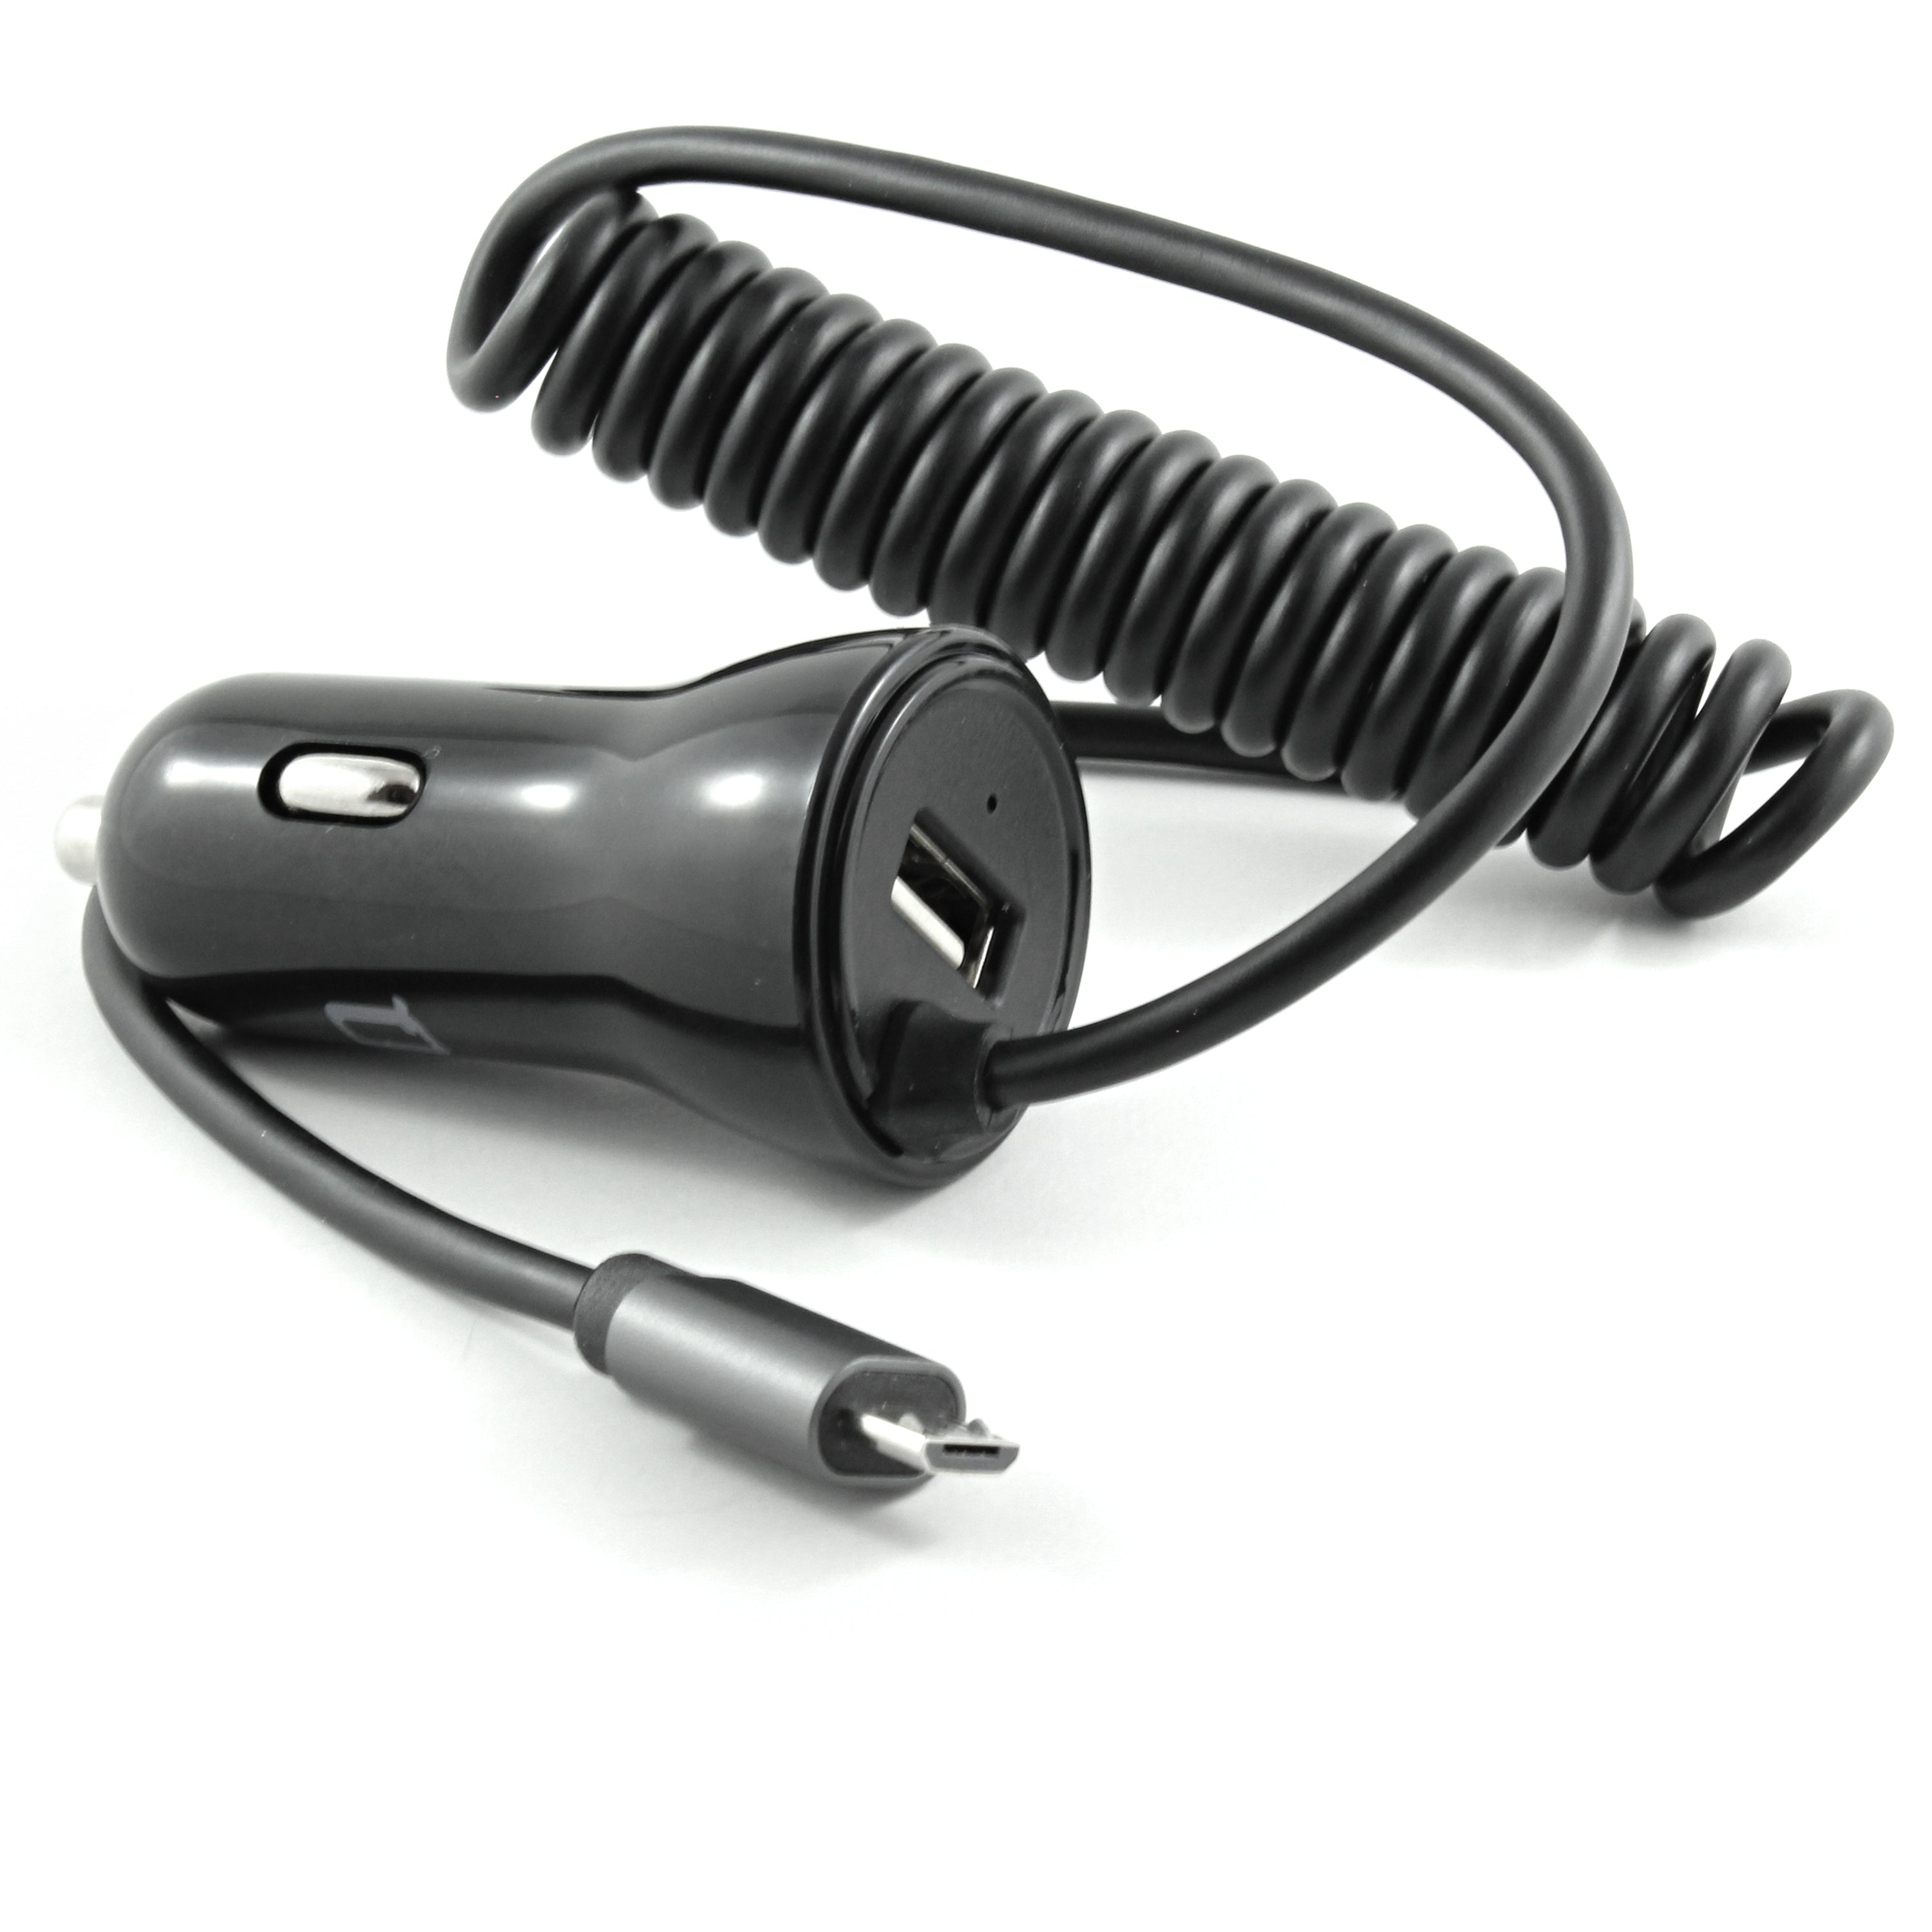 iQ USB 4.8A Rapid Car Charger w/ Built-In Cable - 1.2m/4ft